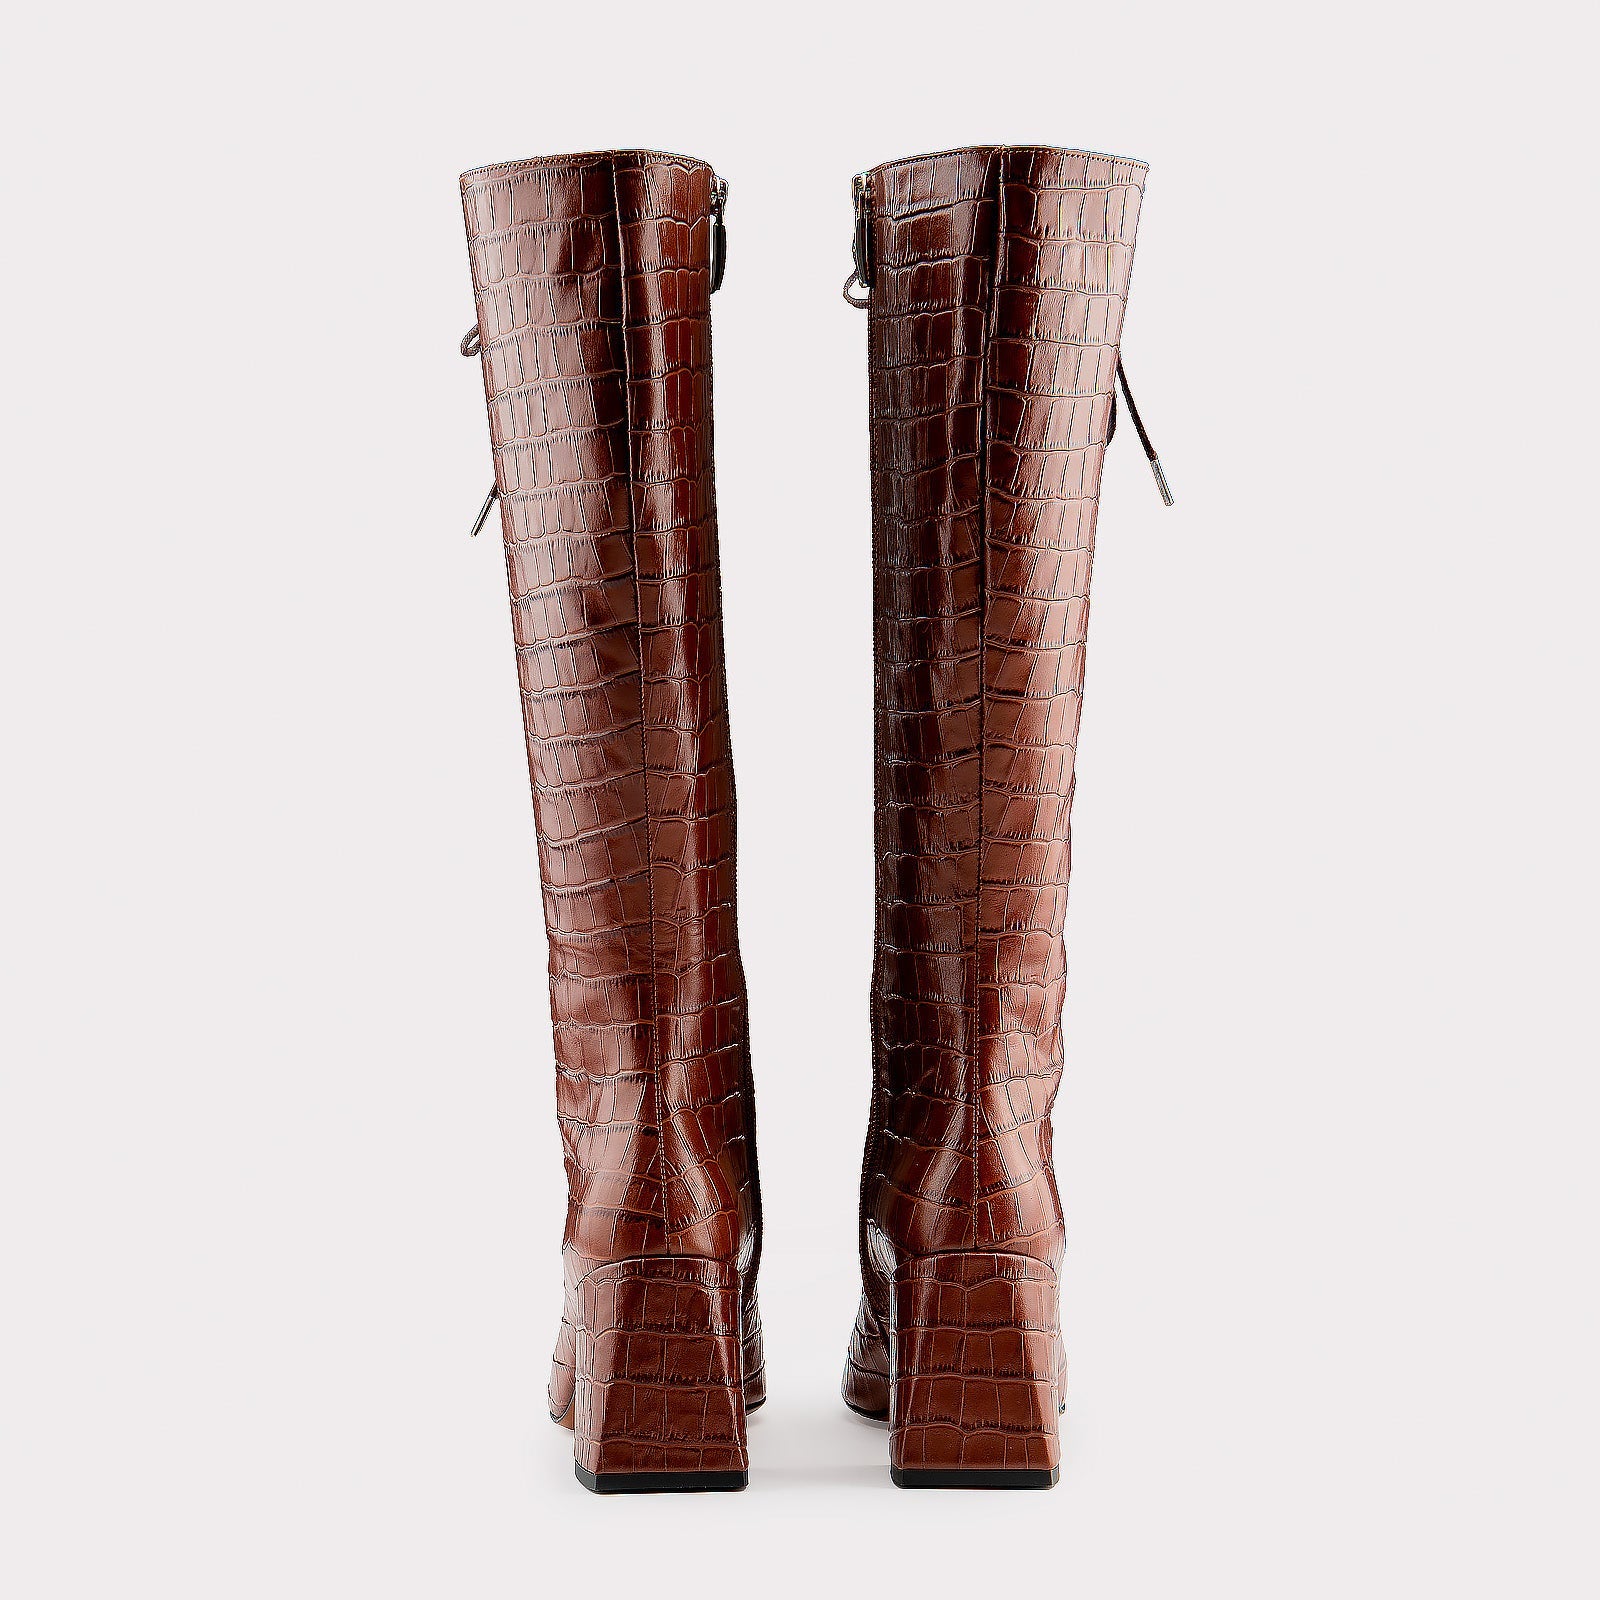 MONICA 03 BROWN CROCO EMBOSSED LEATHER BOOTS